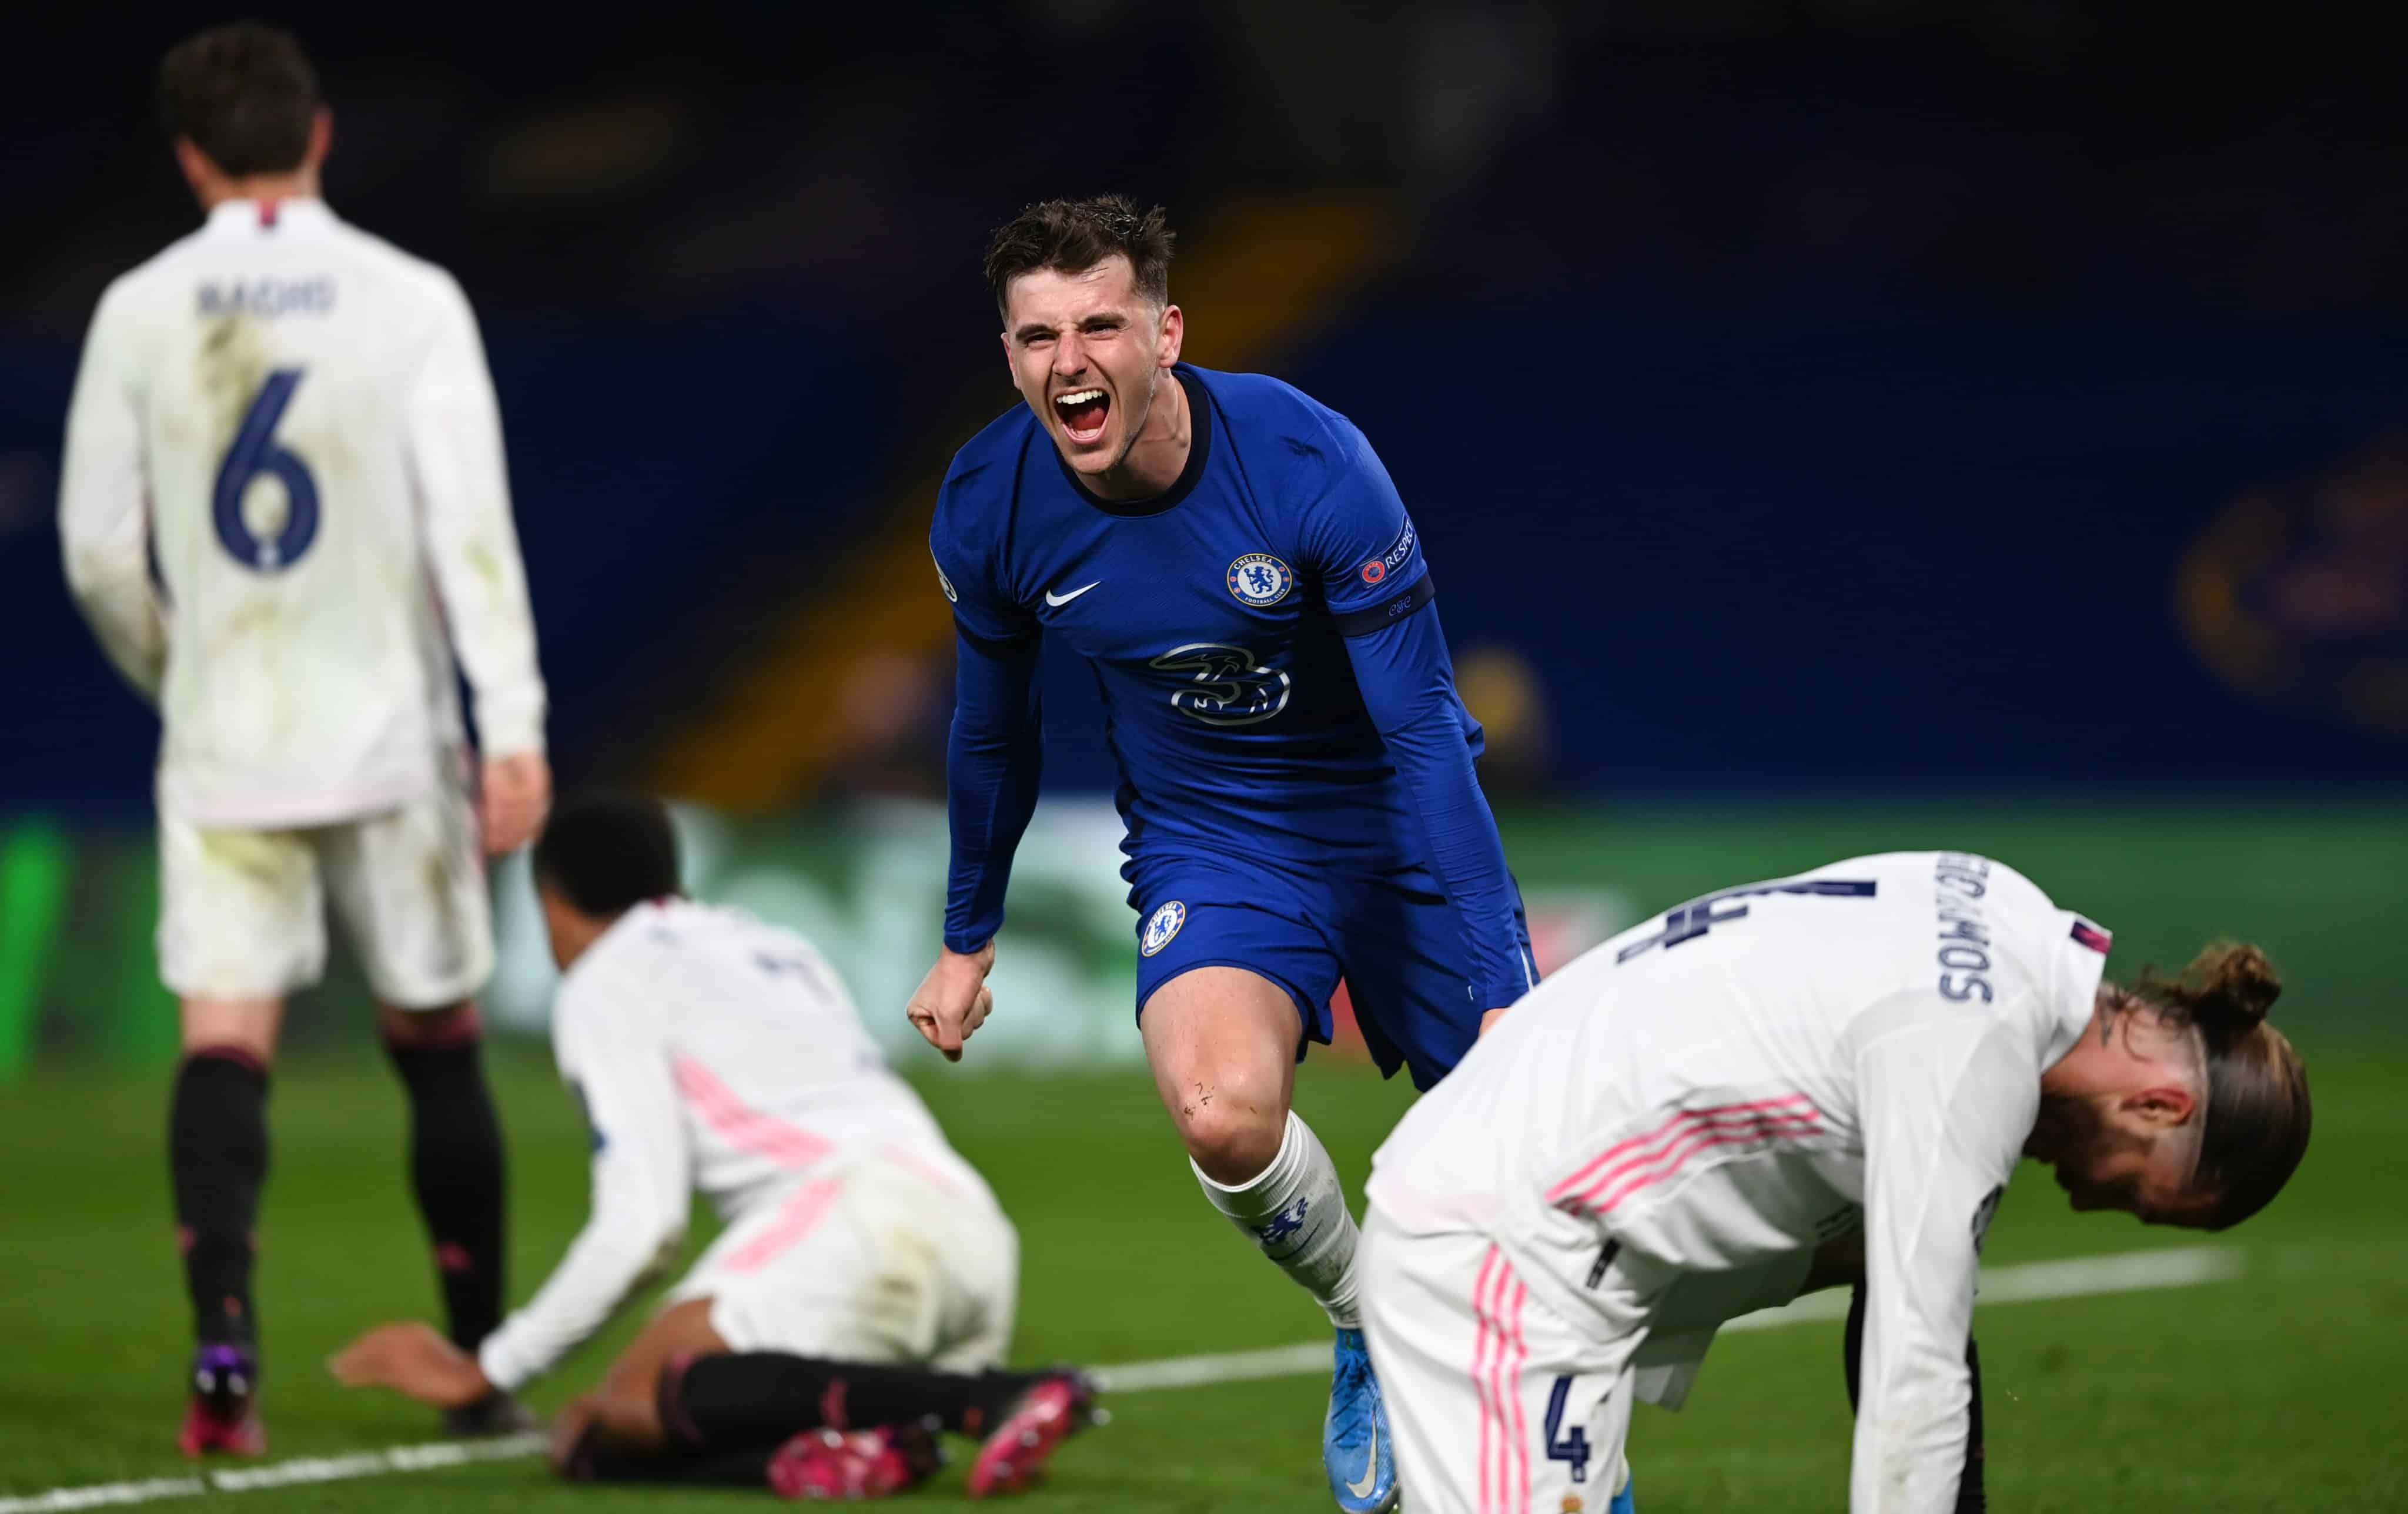 Chelsea beat Real Madrid to reach Champions League final